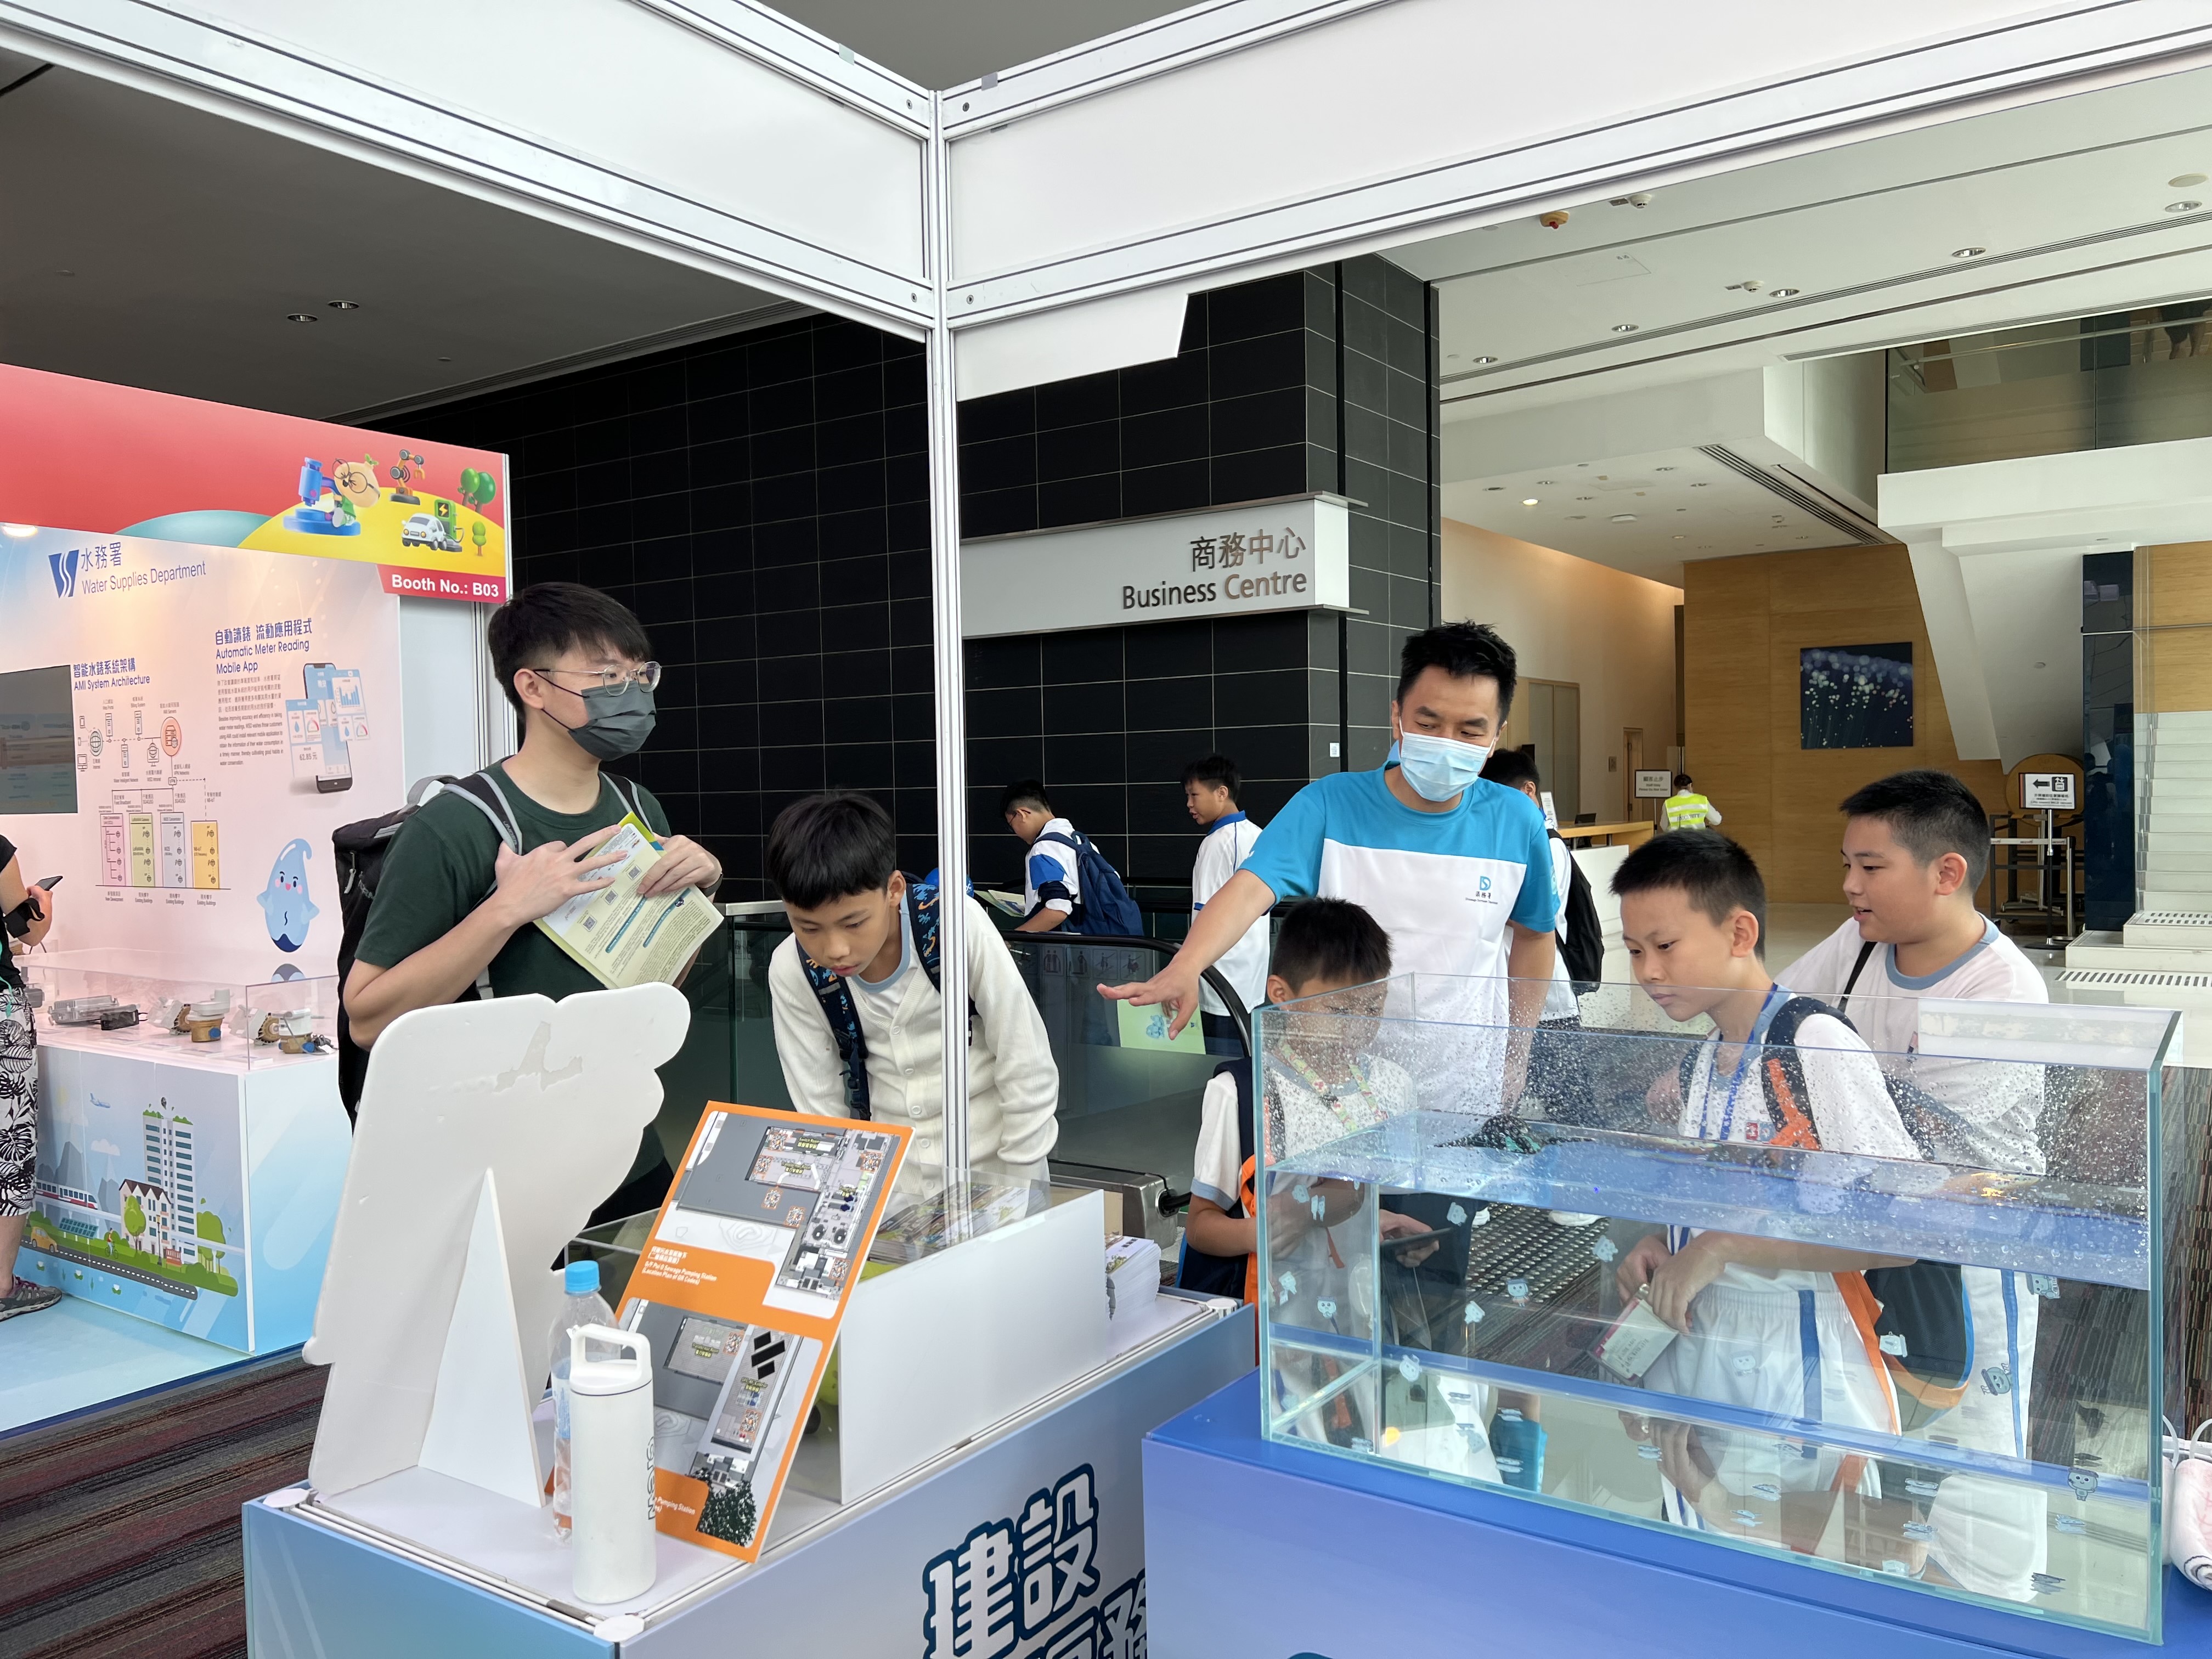 The public participated actively in the trial of mini Underwater Robot